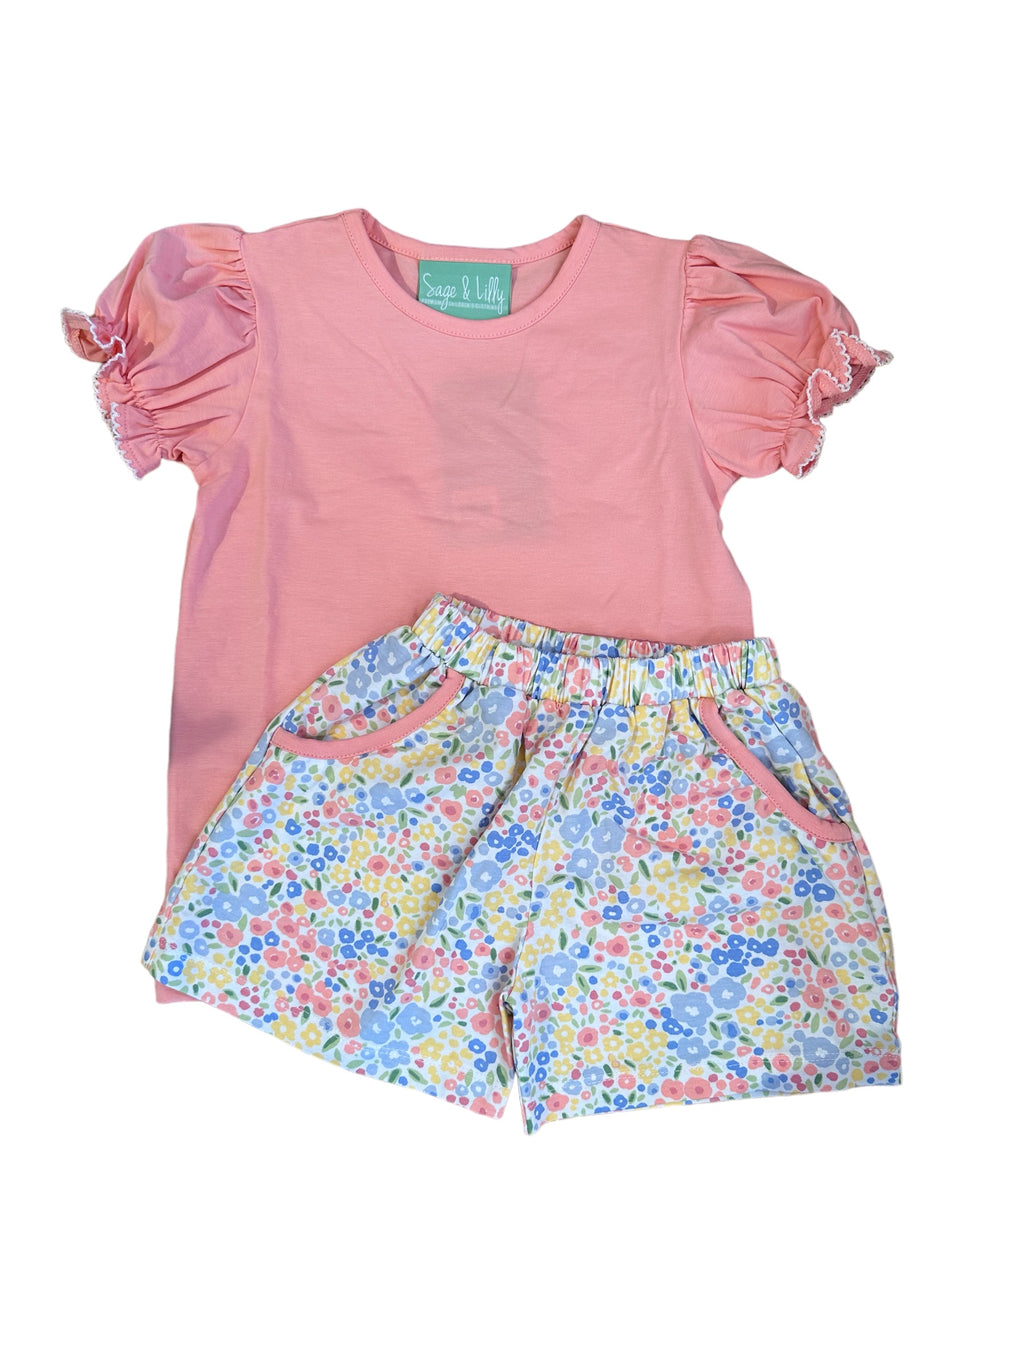 SAGE & LILLY PINK/BLUE FLORAL PUFF SLEEVE TOP/ PLAY SHORTS